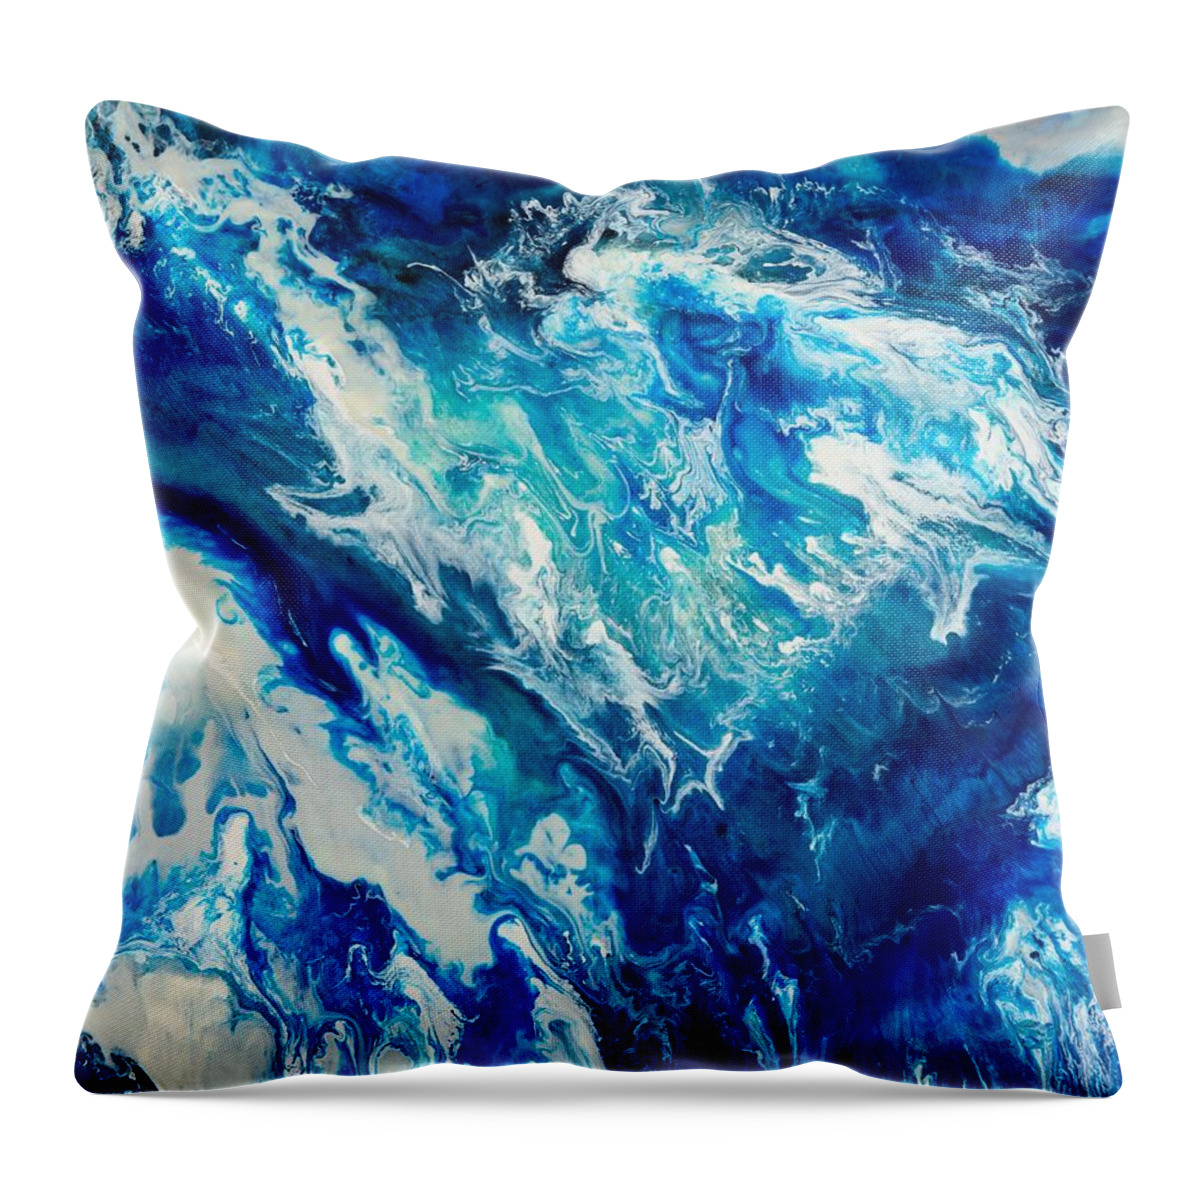 Abstract Throw Pillow featuring the digital art Between Heaven And Earth - Abstract Contemporary Acrylic Painting by Sambel Pedes